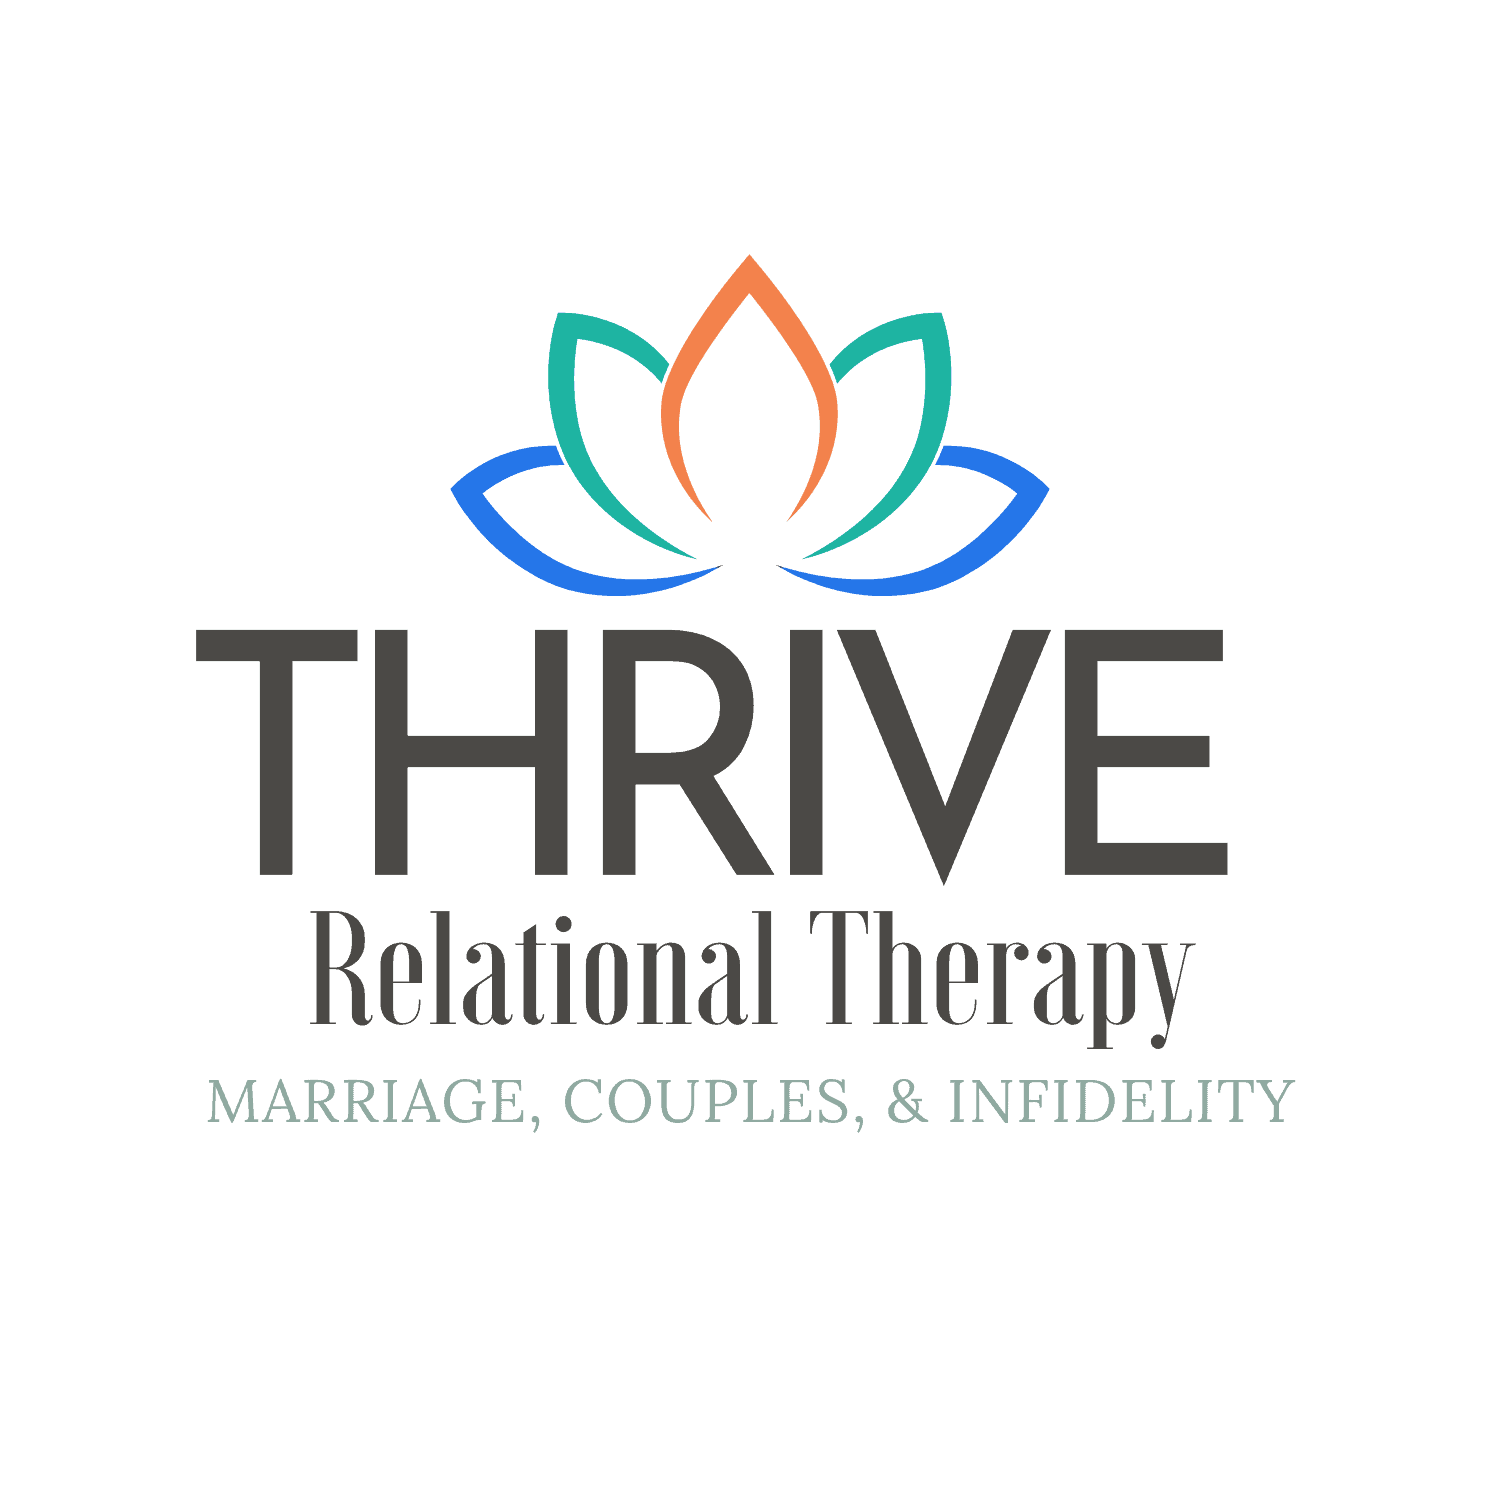 Thrive Relational Therapy – Marriage, Couples & Infidelity Online Video Counseling of Vancouver